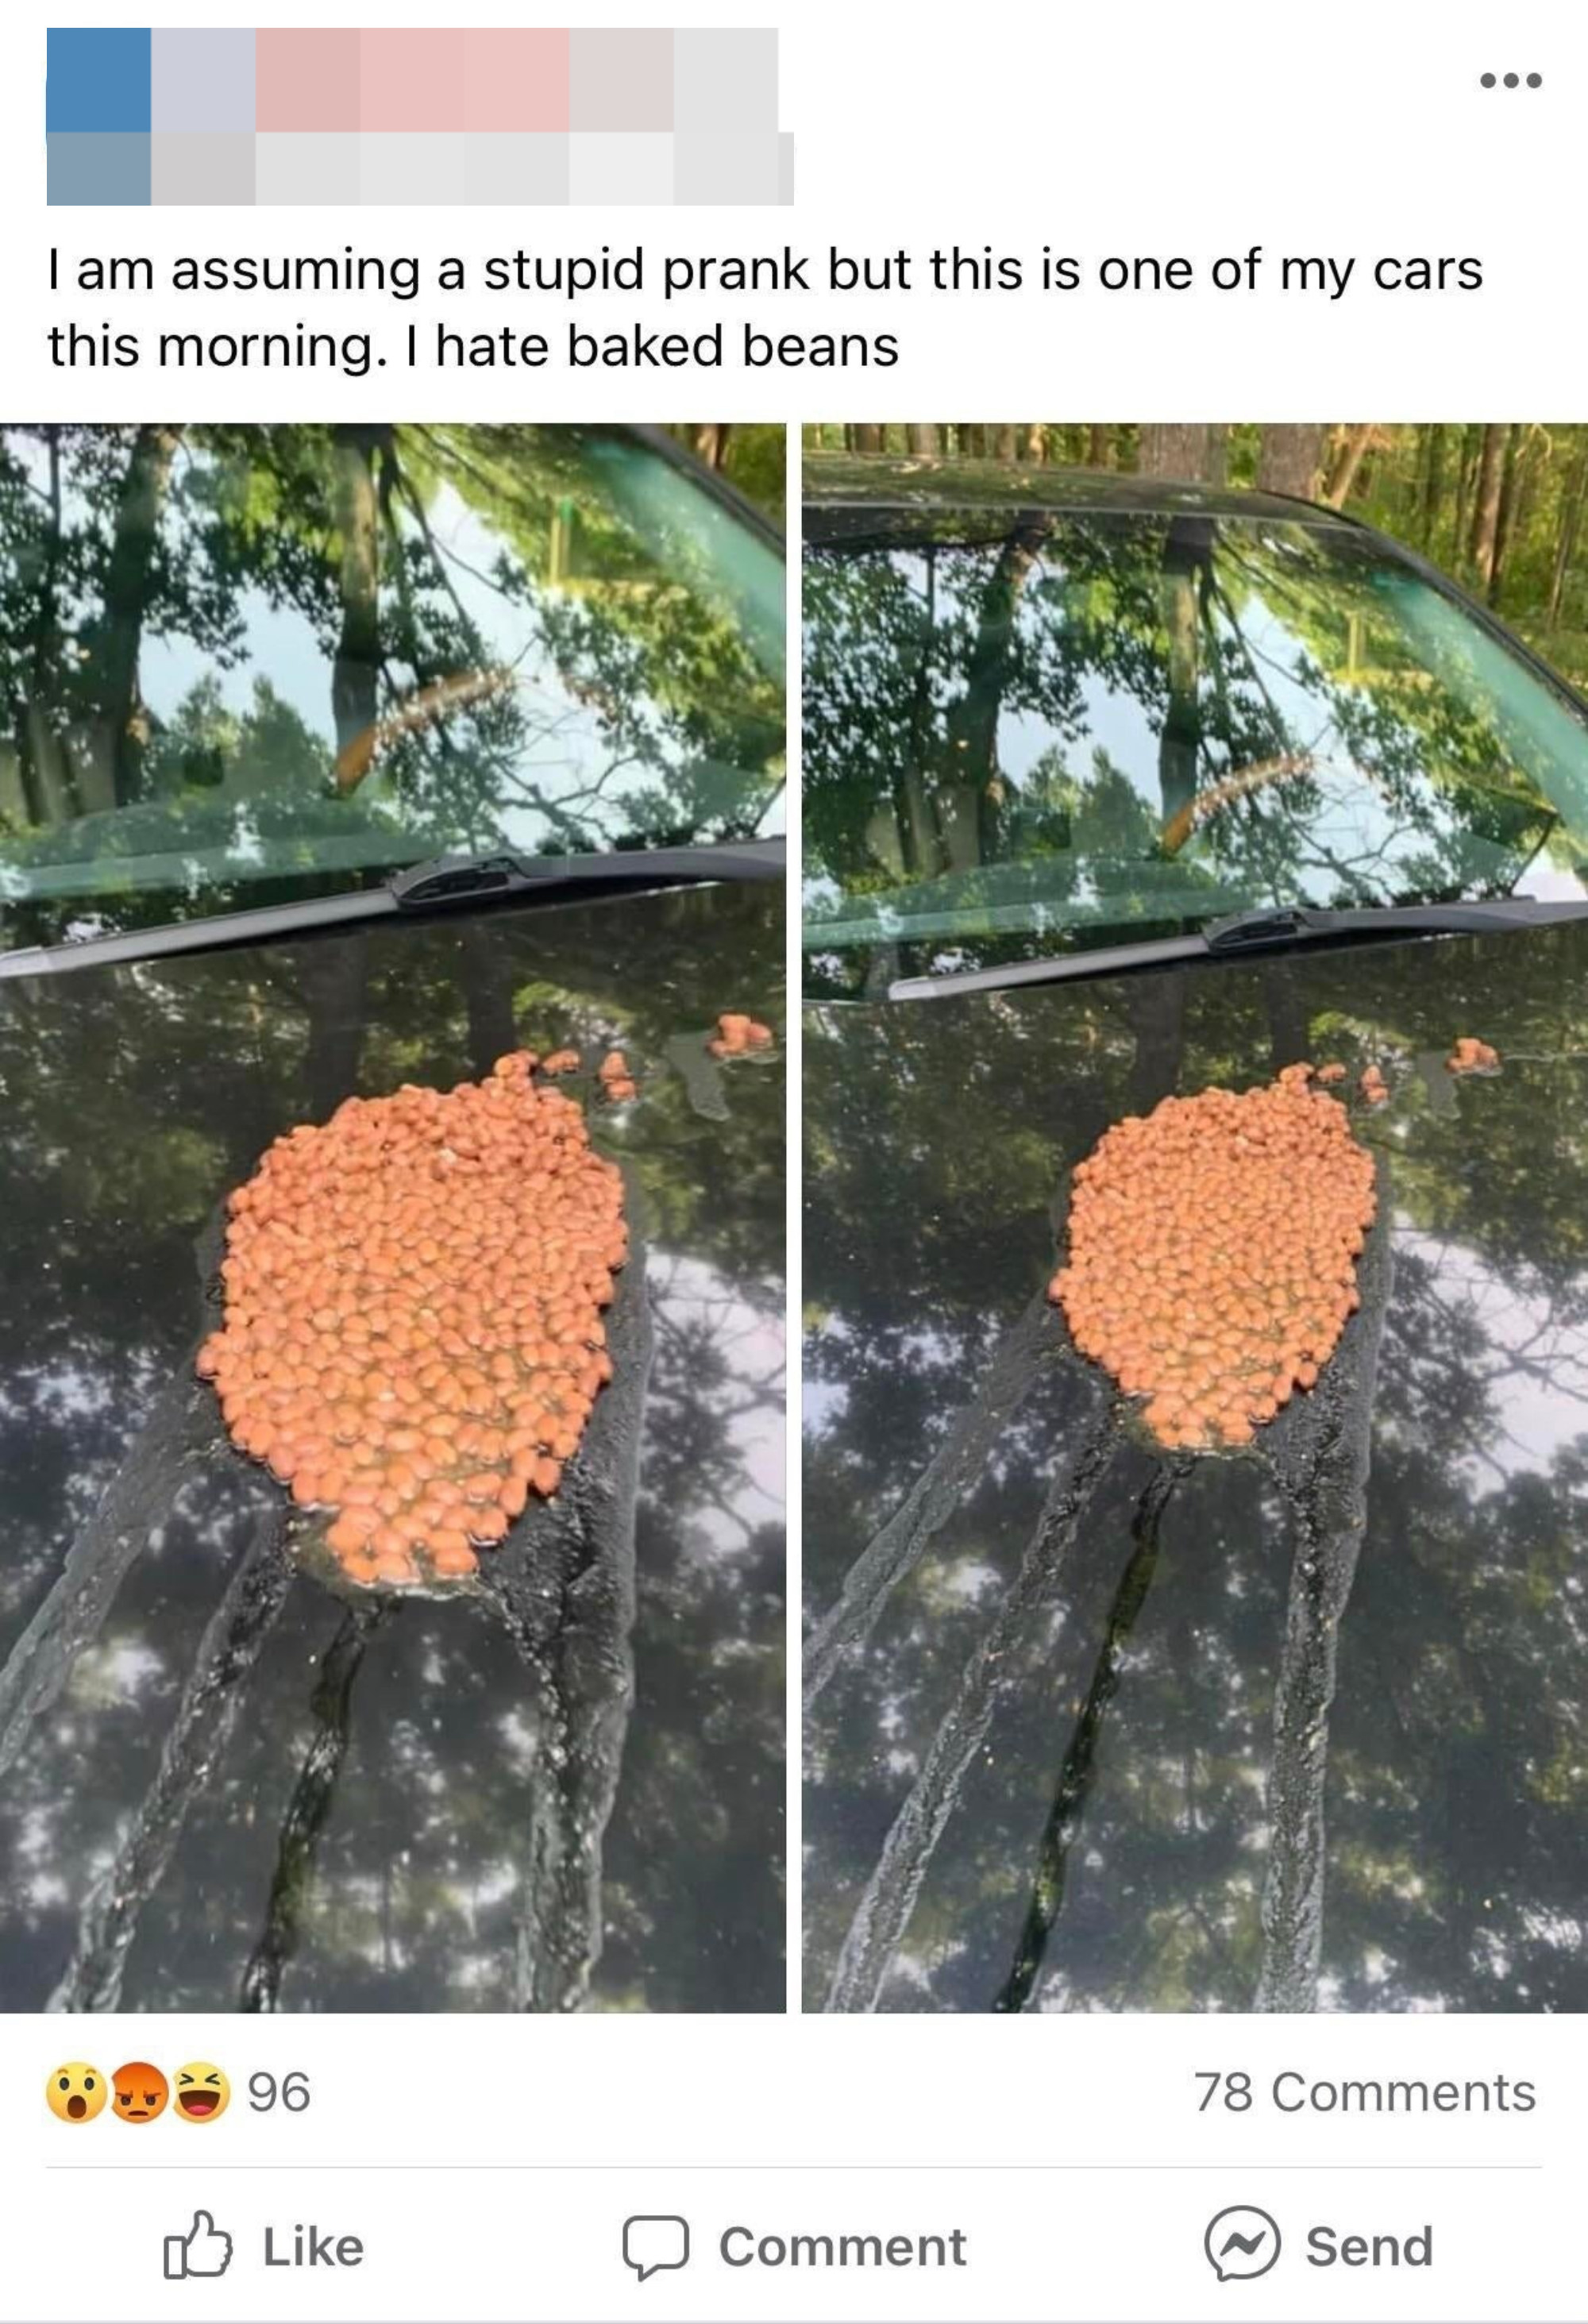 someone getting pranked by someone putting beans on their car